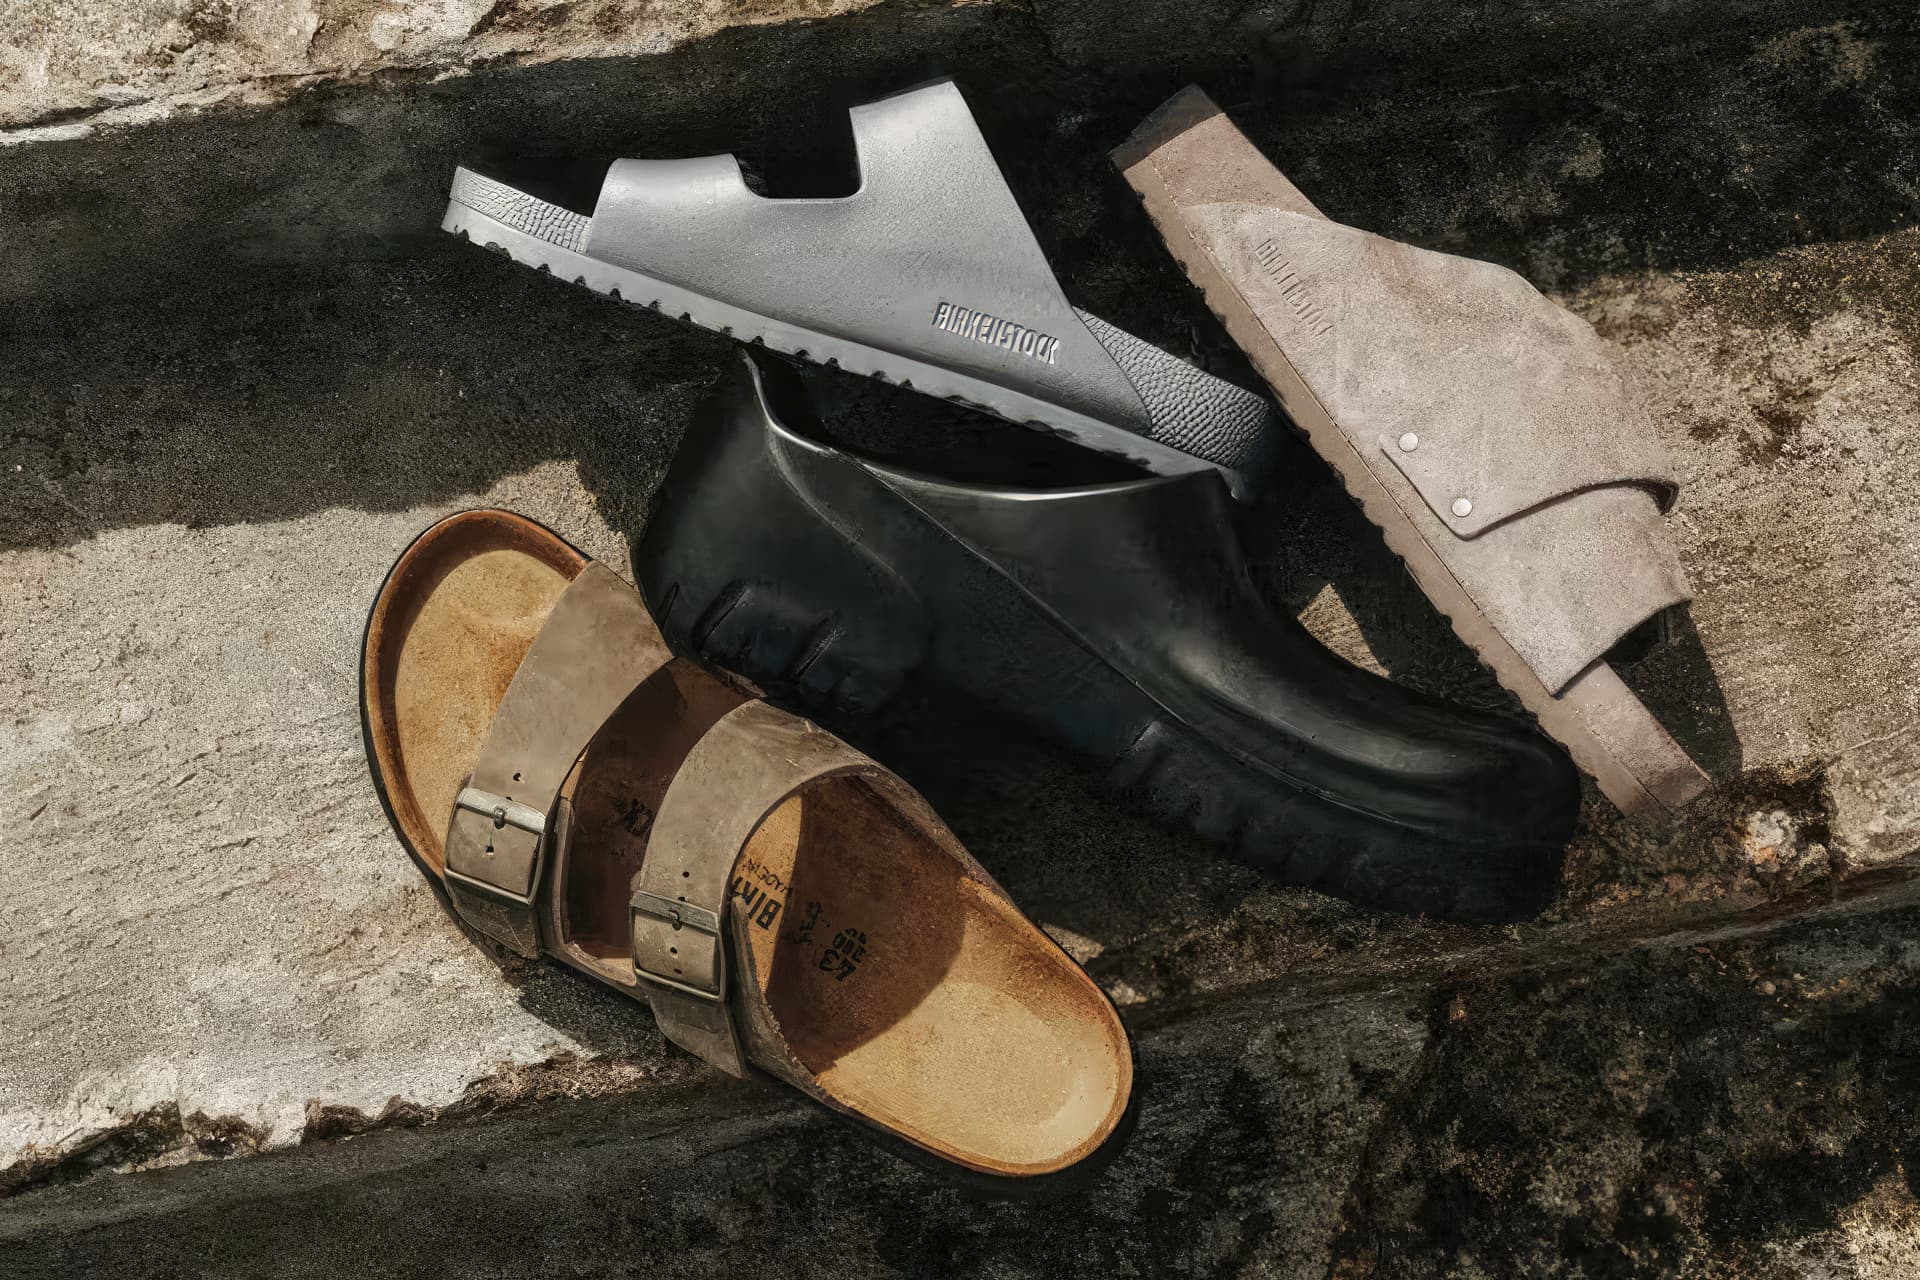 Dior Bets Big on a Birkenstock Collab For Everyone